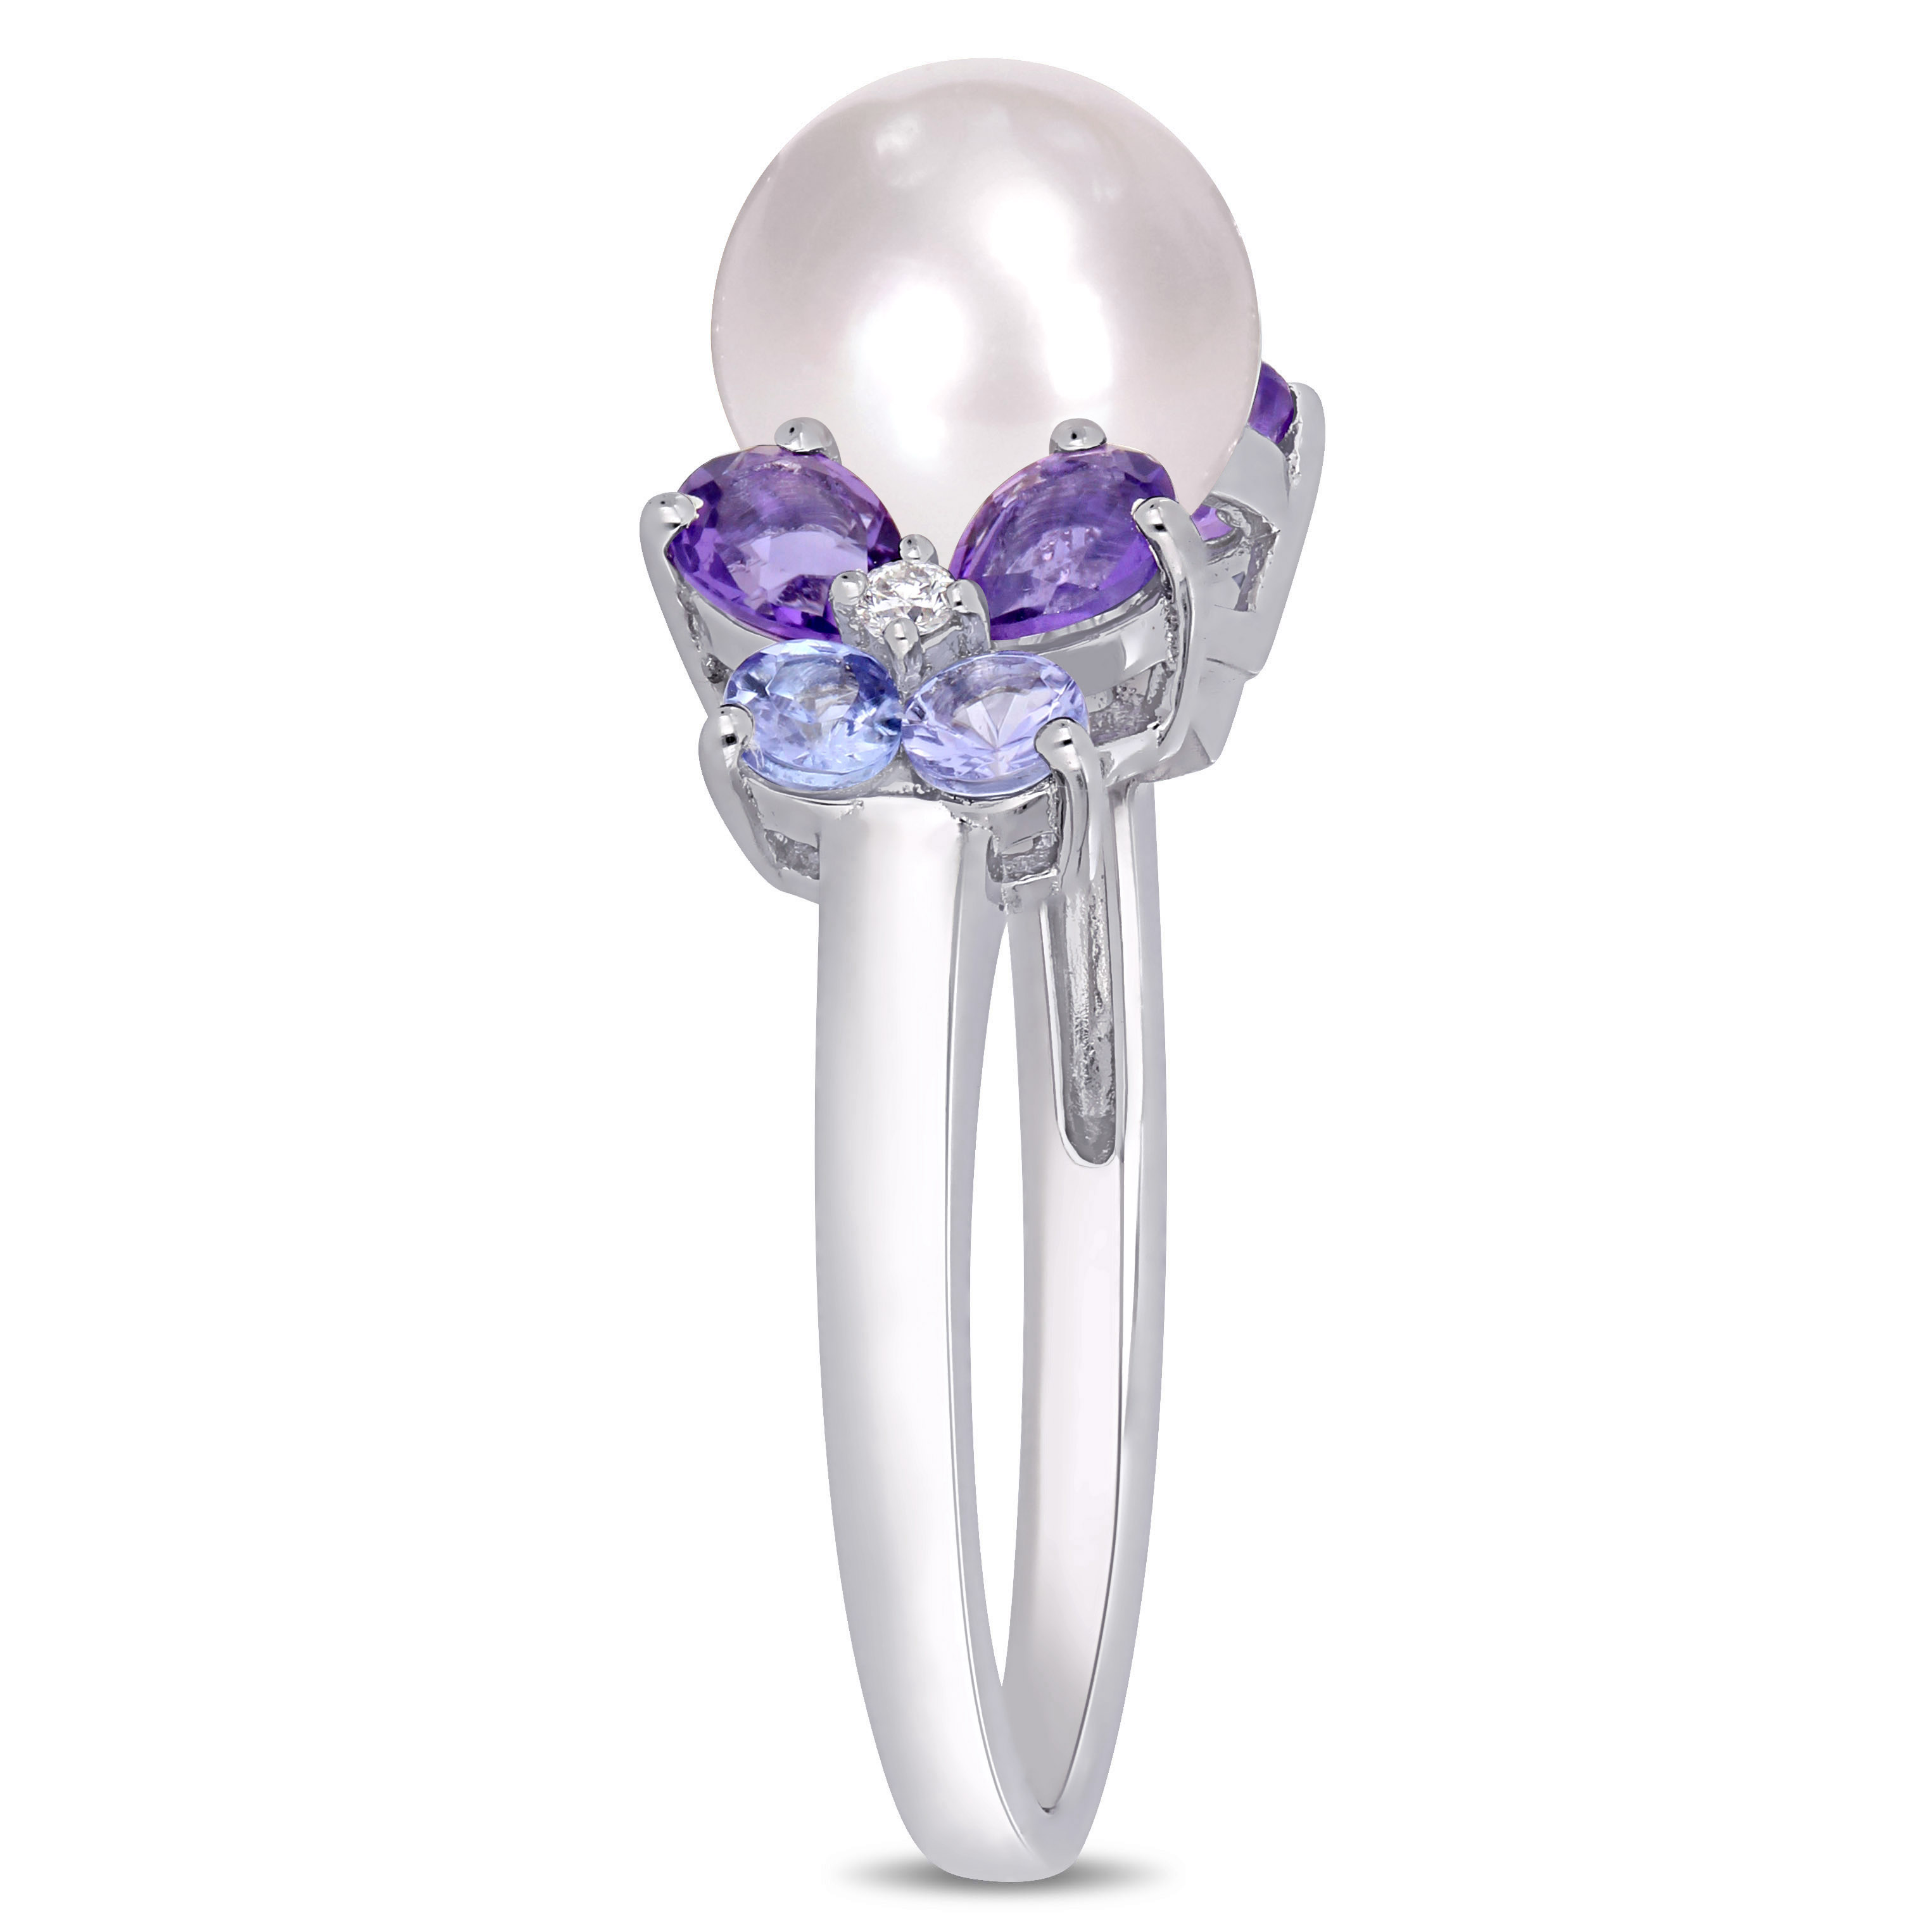 8 - 8.5 MM White Cultured Freshwater Pearl, Diamond, Tanzanite, and Amethyst Ring in Sterling Silver